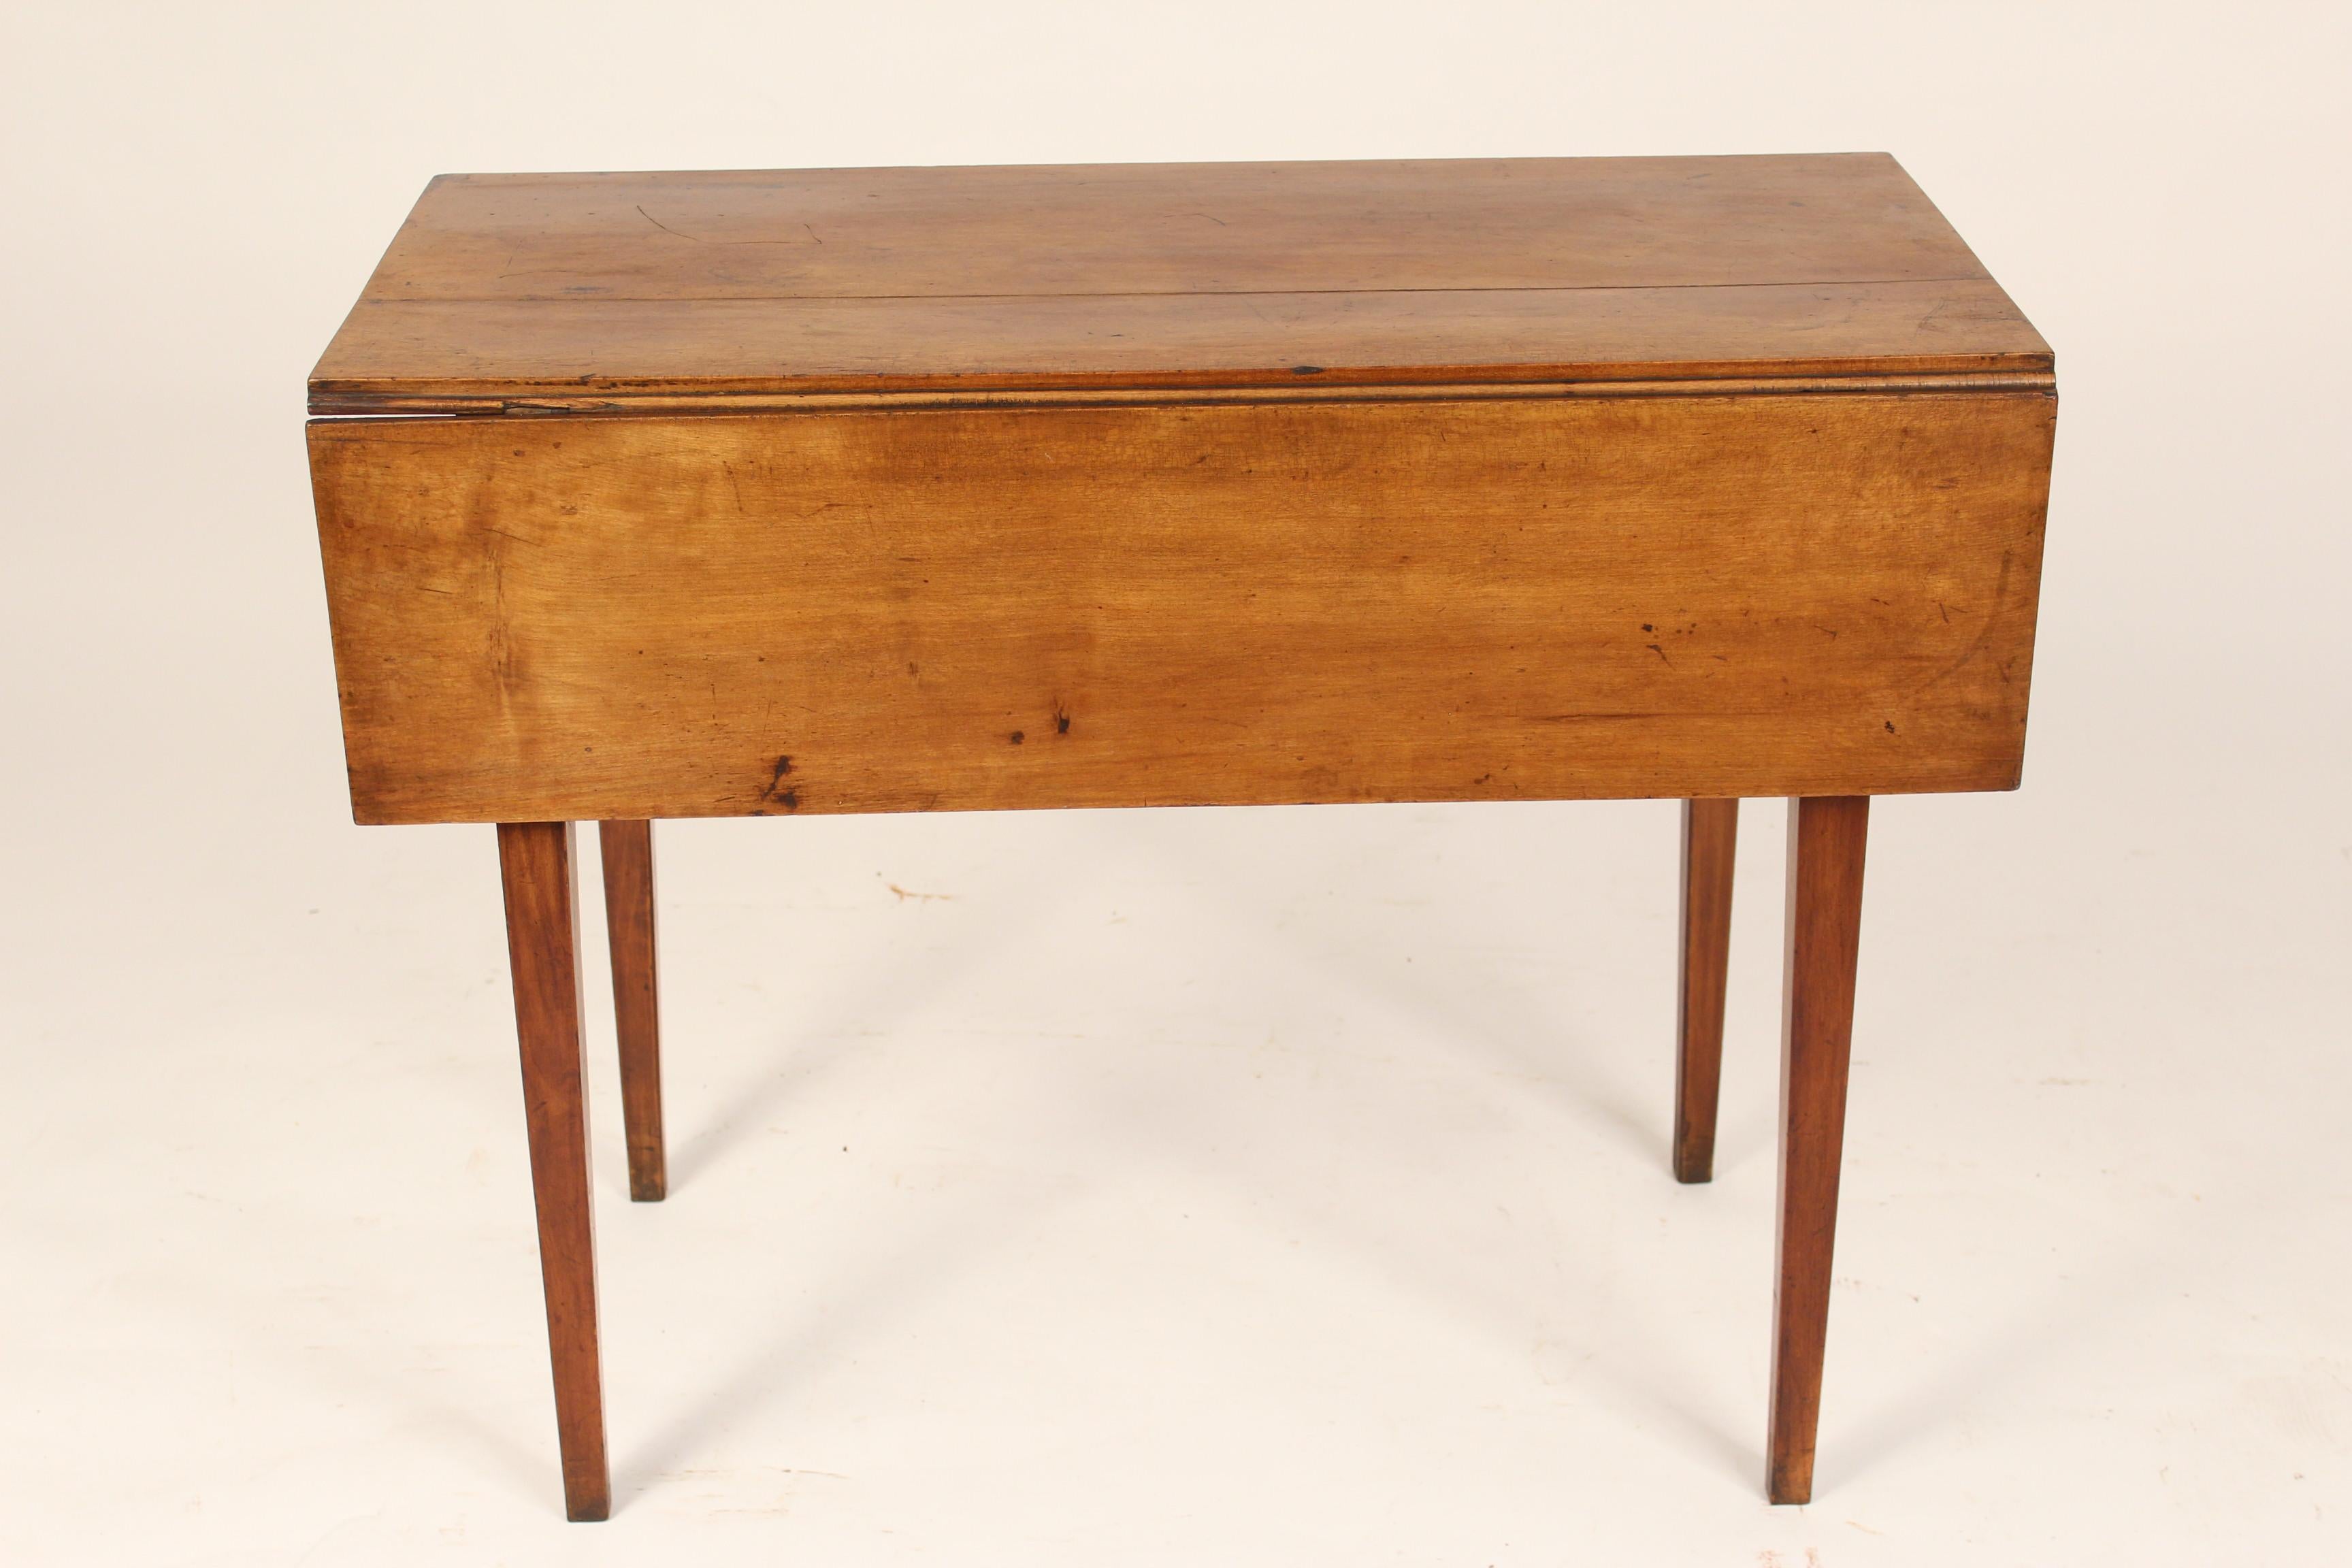 American neo classical fruit wood drop leaf table, circa 1810. Nice old fruit wood color. A versatile table that could be used as a small dining table, games table, sofa table or lamp table. Dimensions when drop leafs are lowered, height 29.5 width